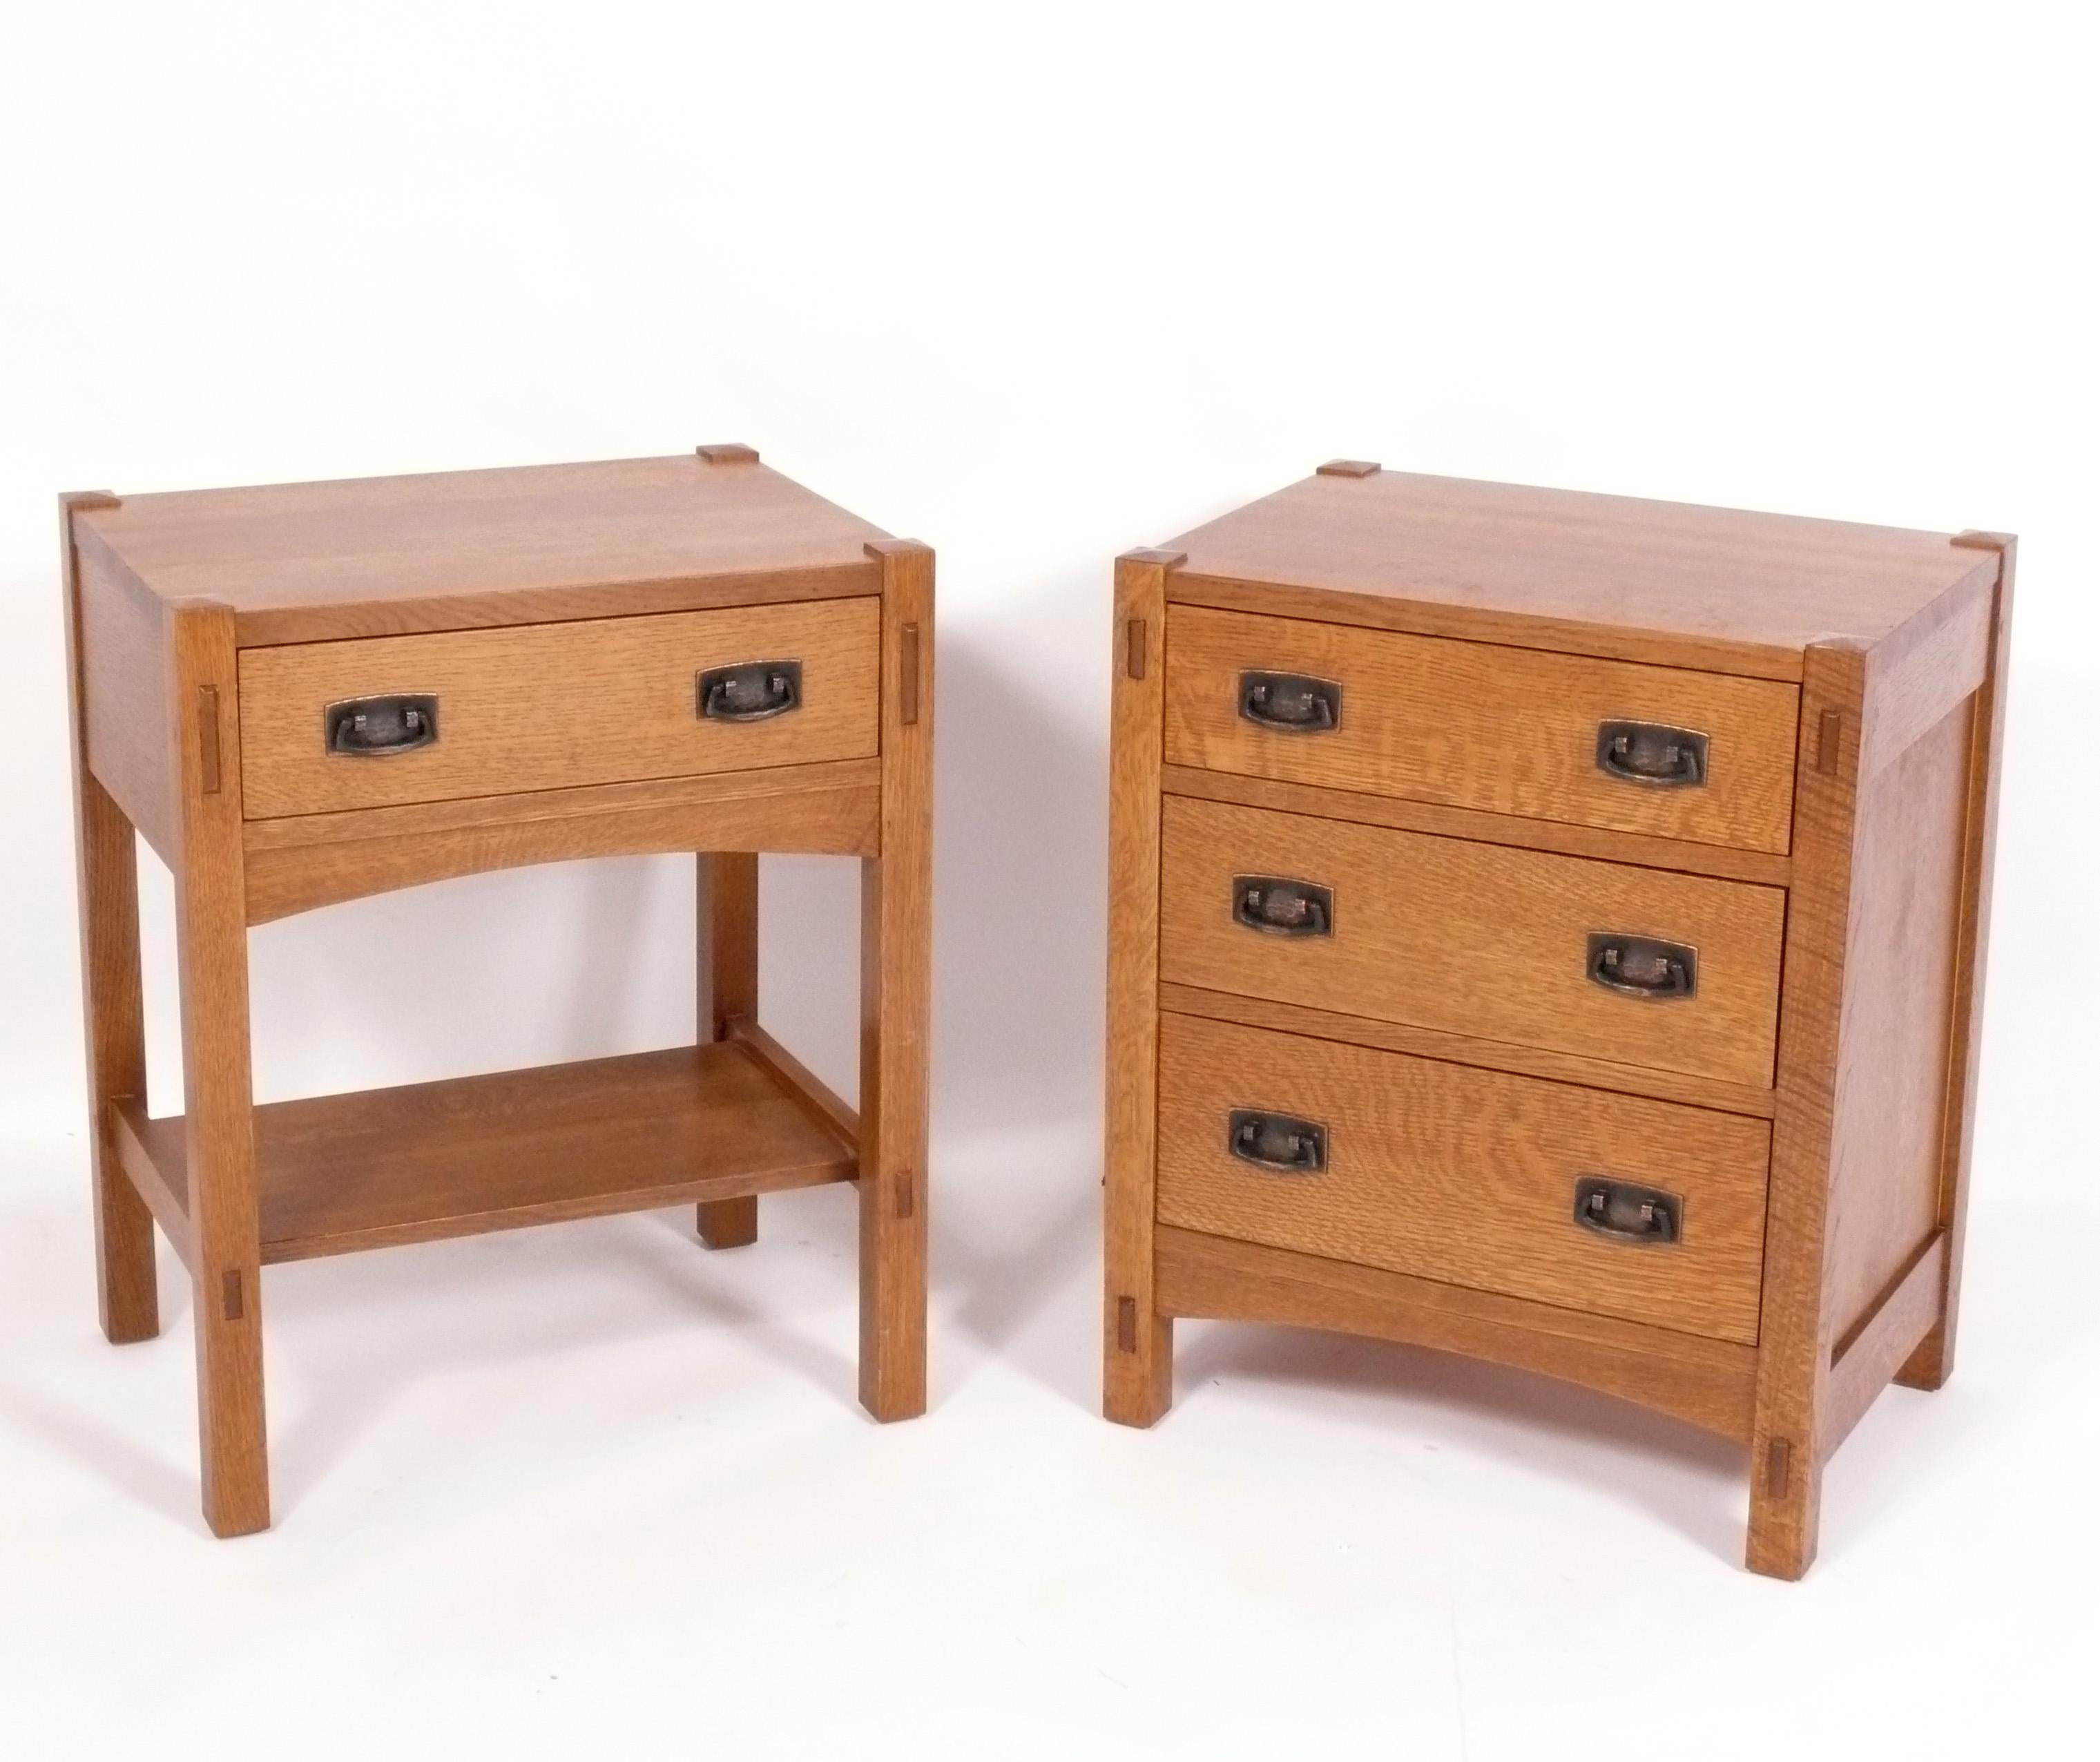 Clean Lined Stickley Night Stands or Side or End Tables, originally designed in the 1910s by Gustav Stickley, this example is part of the authorized line produced by Stickley in the 2000s. They are priced at $1400 each or $2500 for the pair. Like